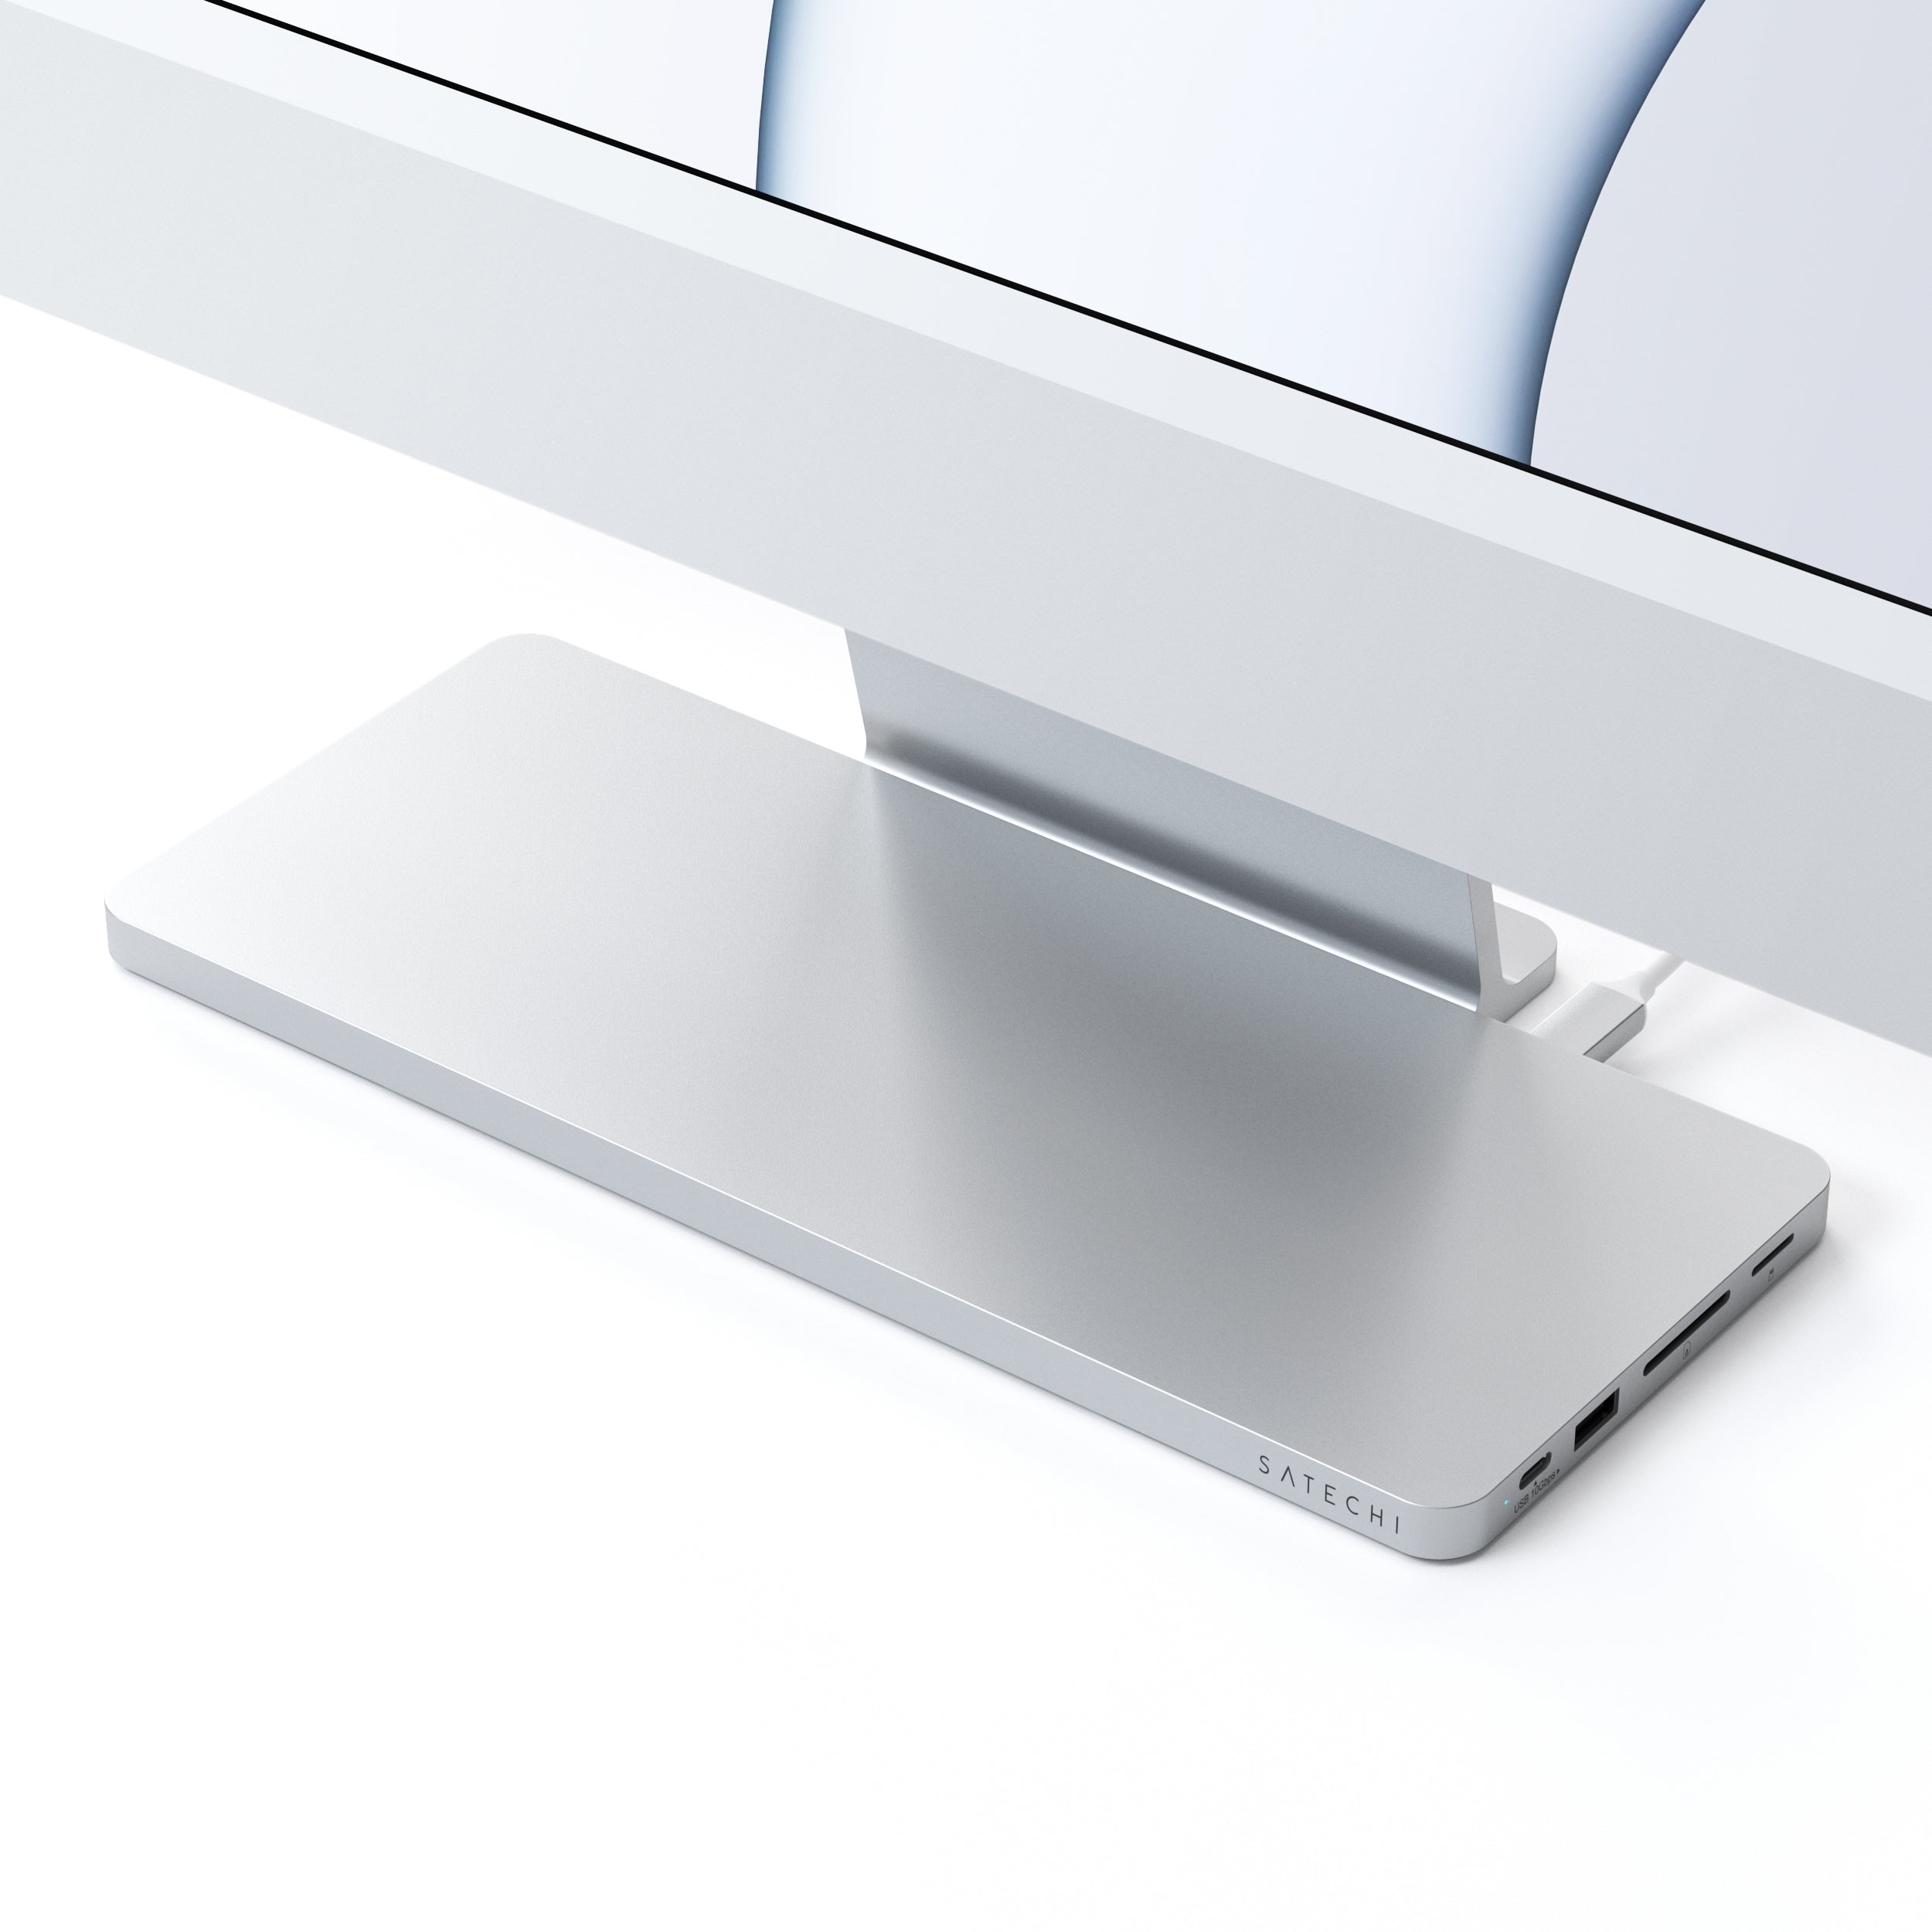 Satechi USB-C Clamp Hub for 24in Apple iMac (ST-UCICHS) - Moment